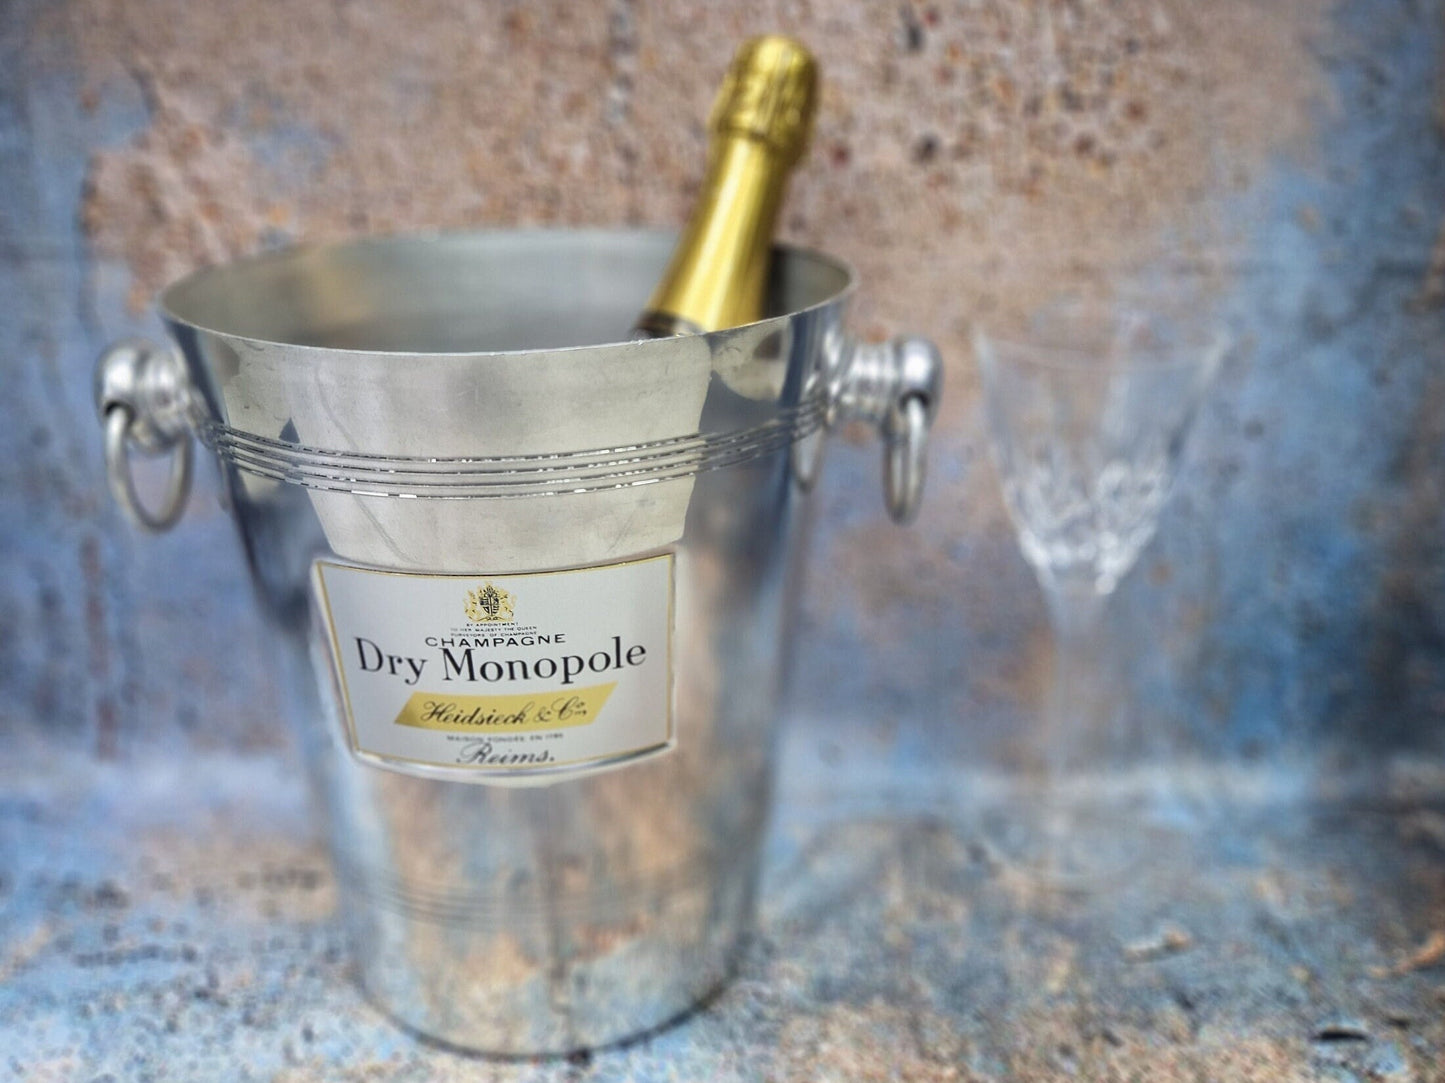 Vintage French Dry Monopole Heidseck champagne ice bucket Rare champagne or wine cooler Metal wine bucket Bar accessory Cafe Restaurant Prop